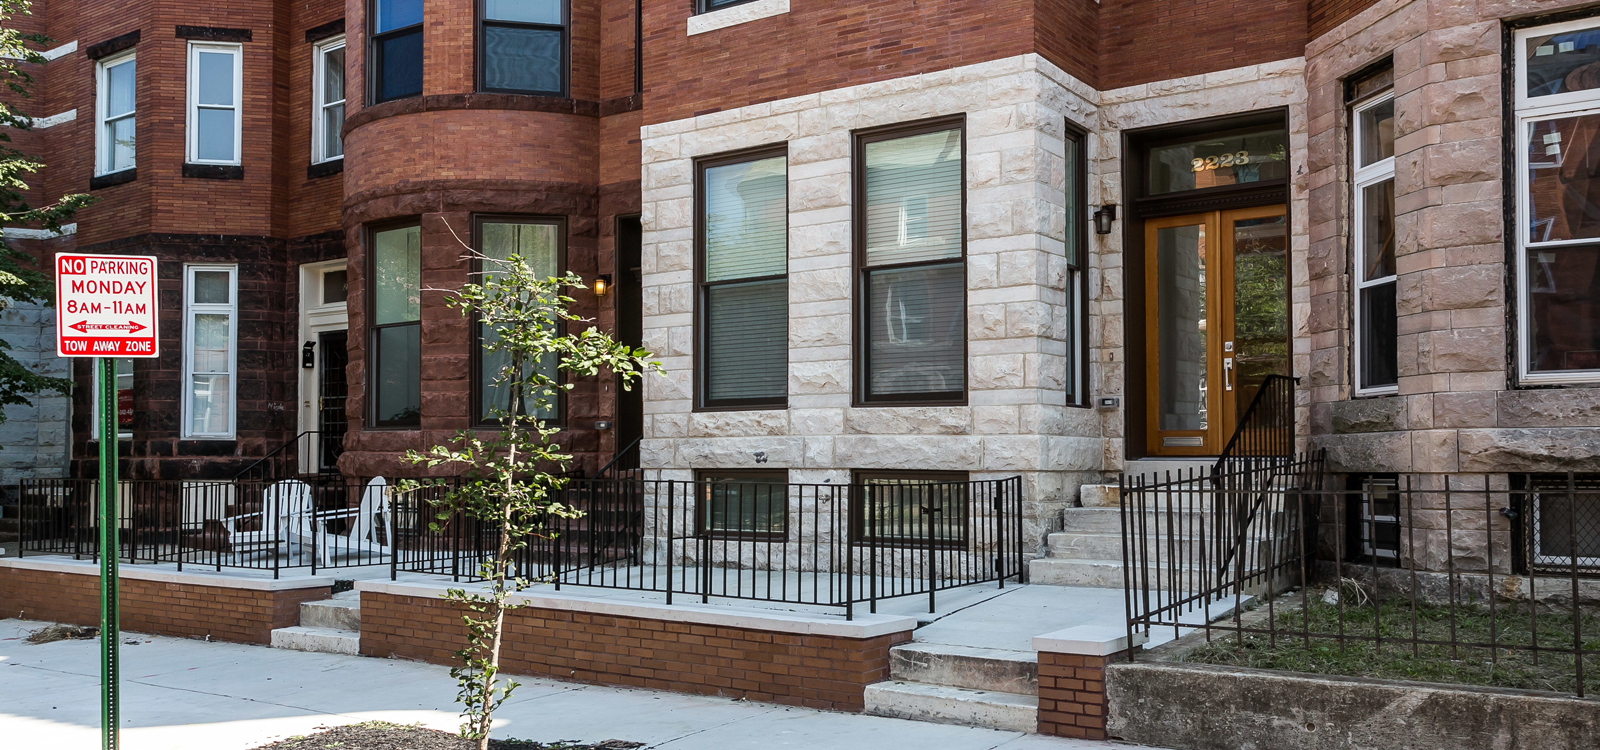 Callow Ave. NSP2 Housing Project, Baltimore, MD, residential renovation by UrbanBuilt